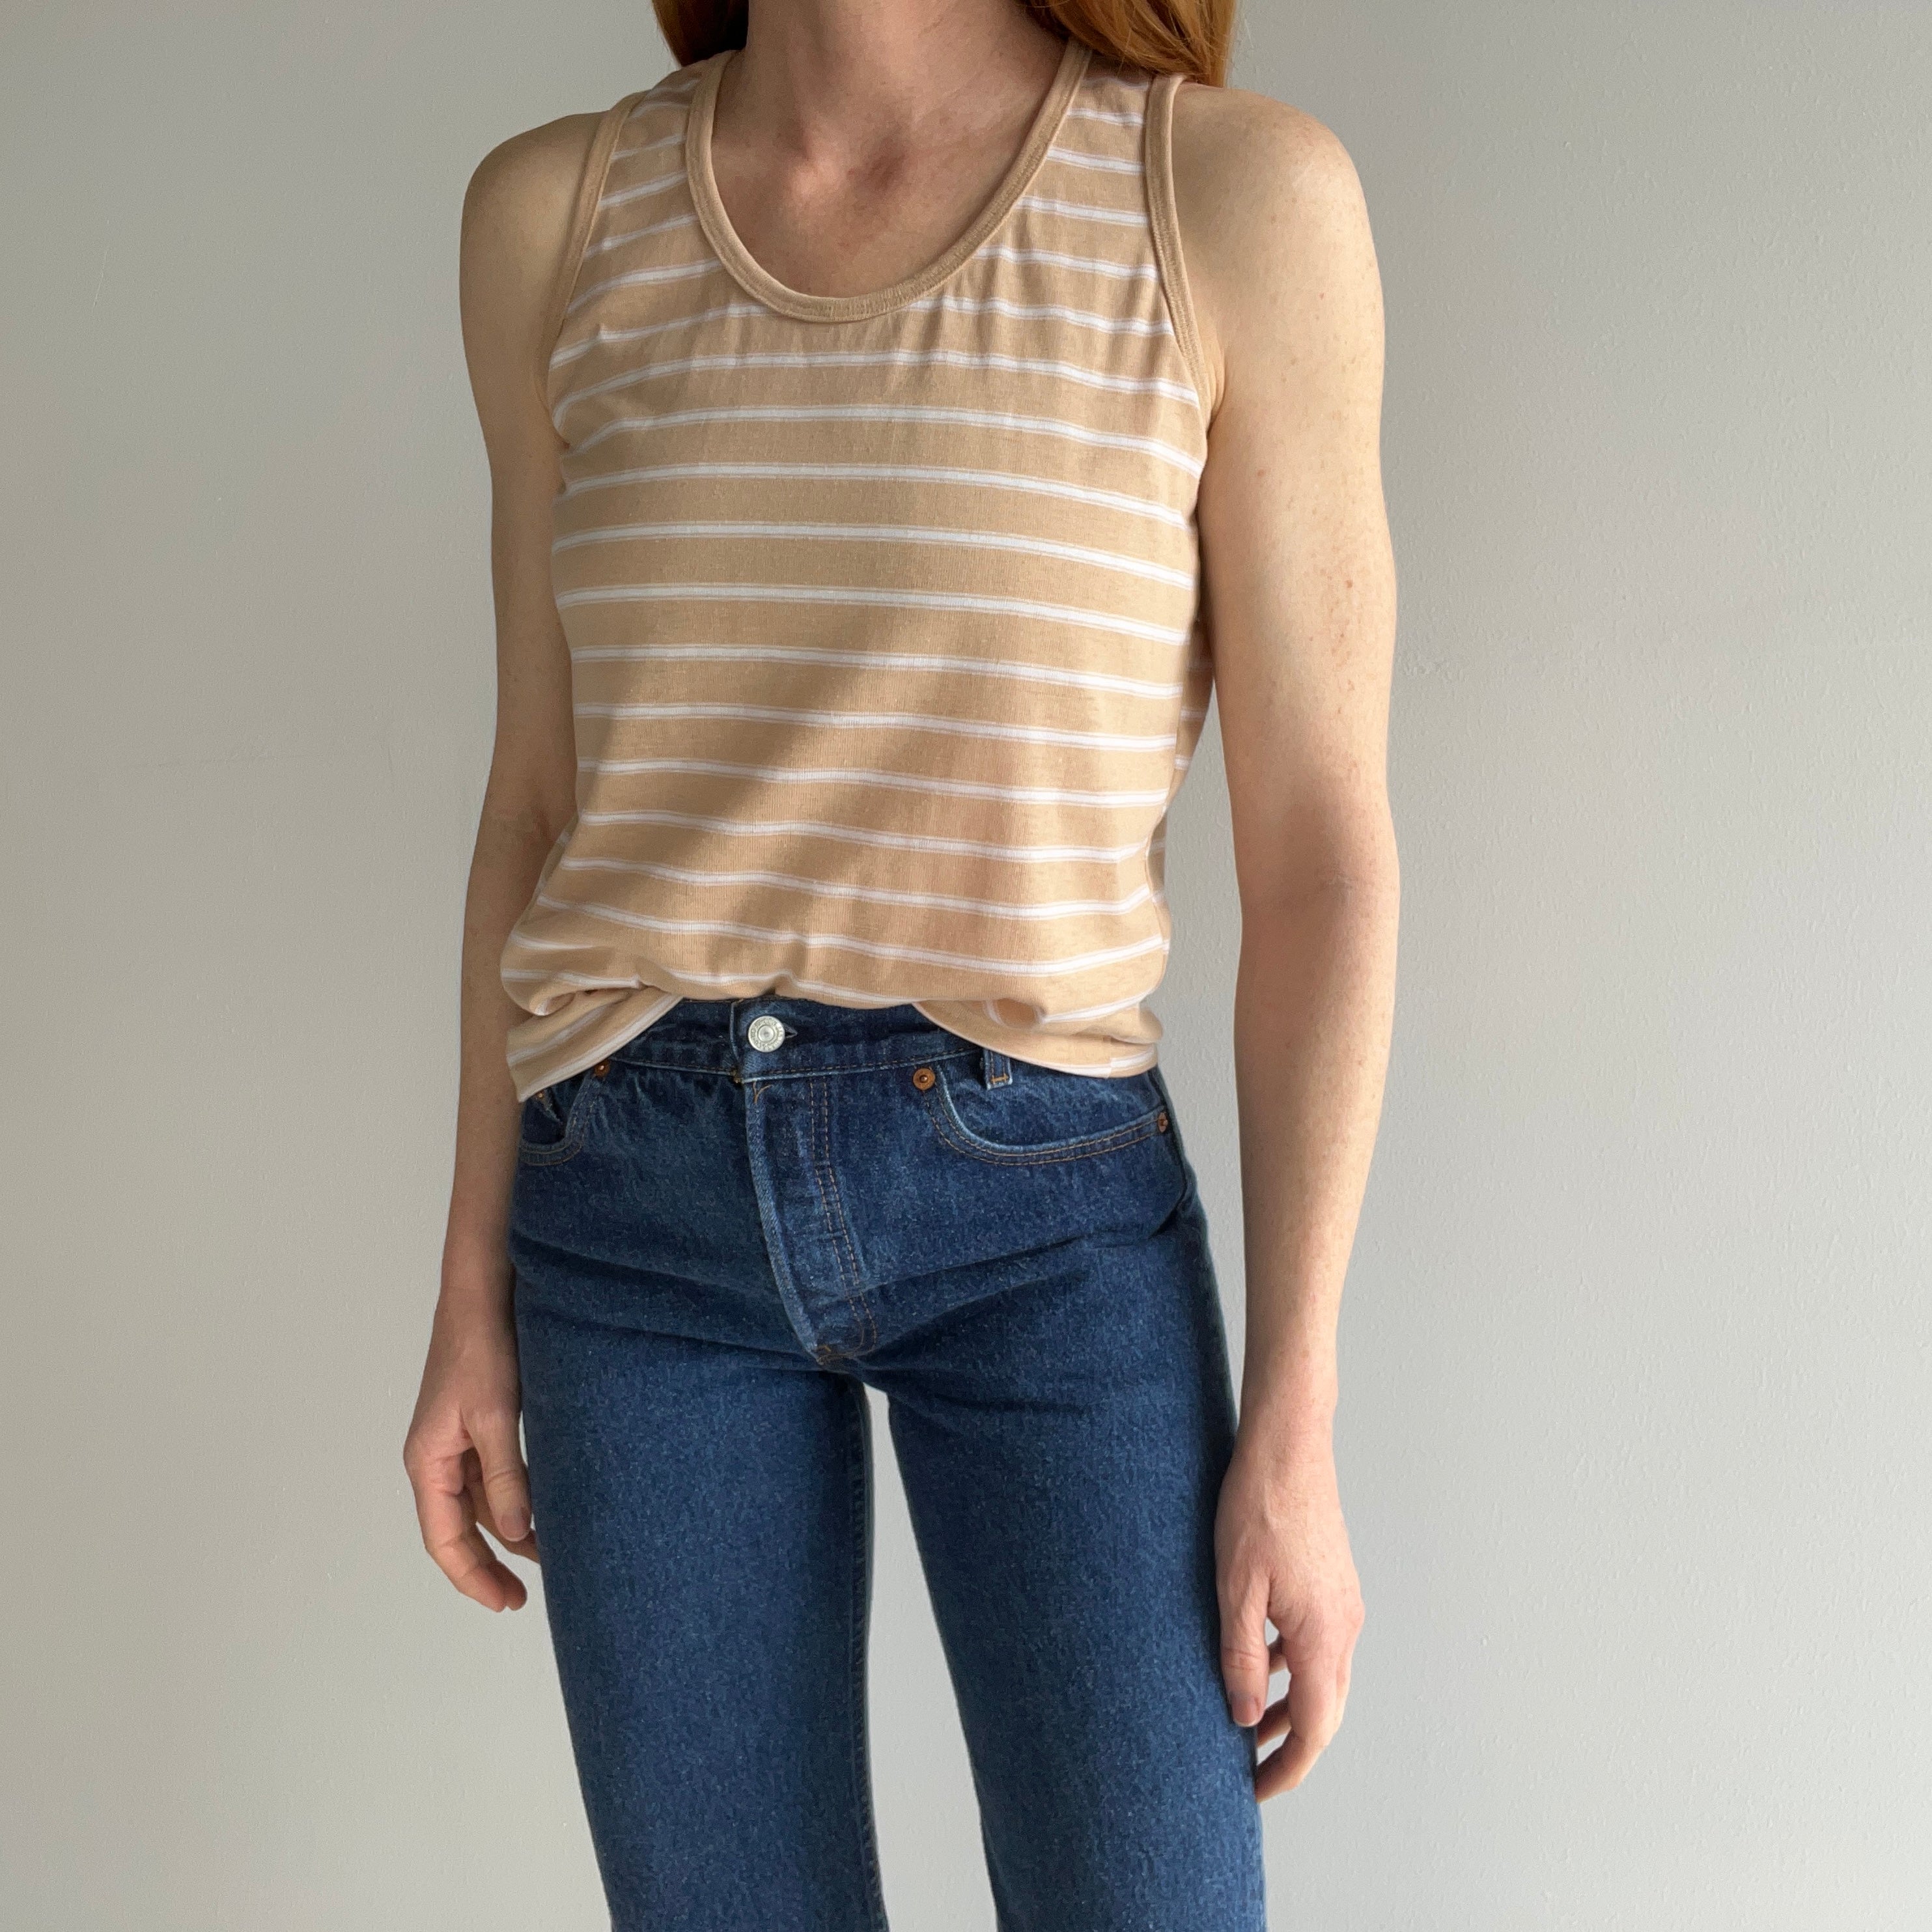 1980s Camel and White Striped Sweet Little Tank Top